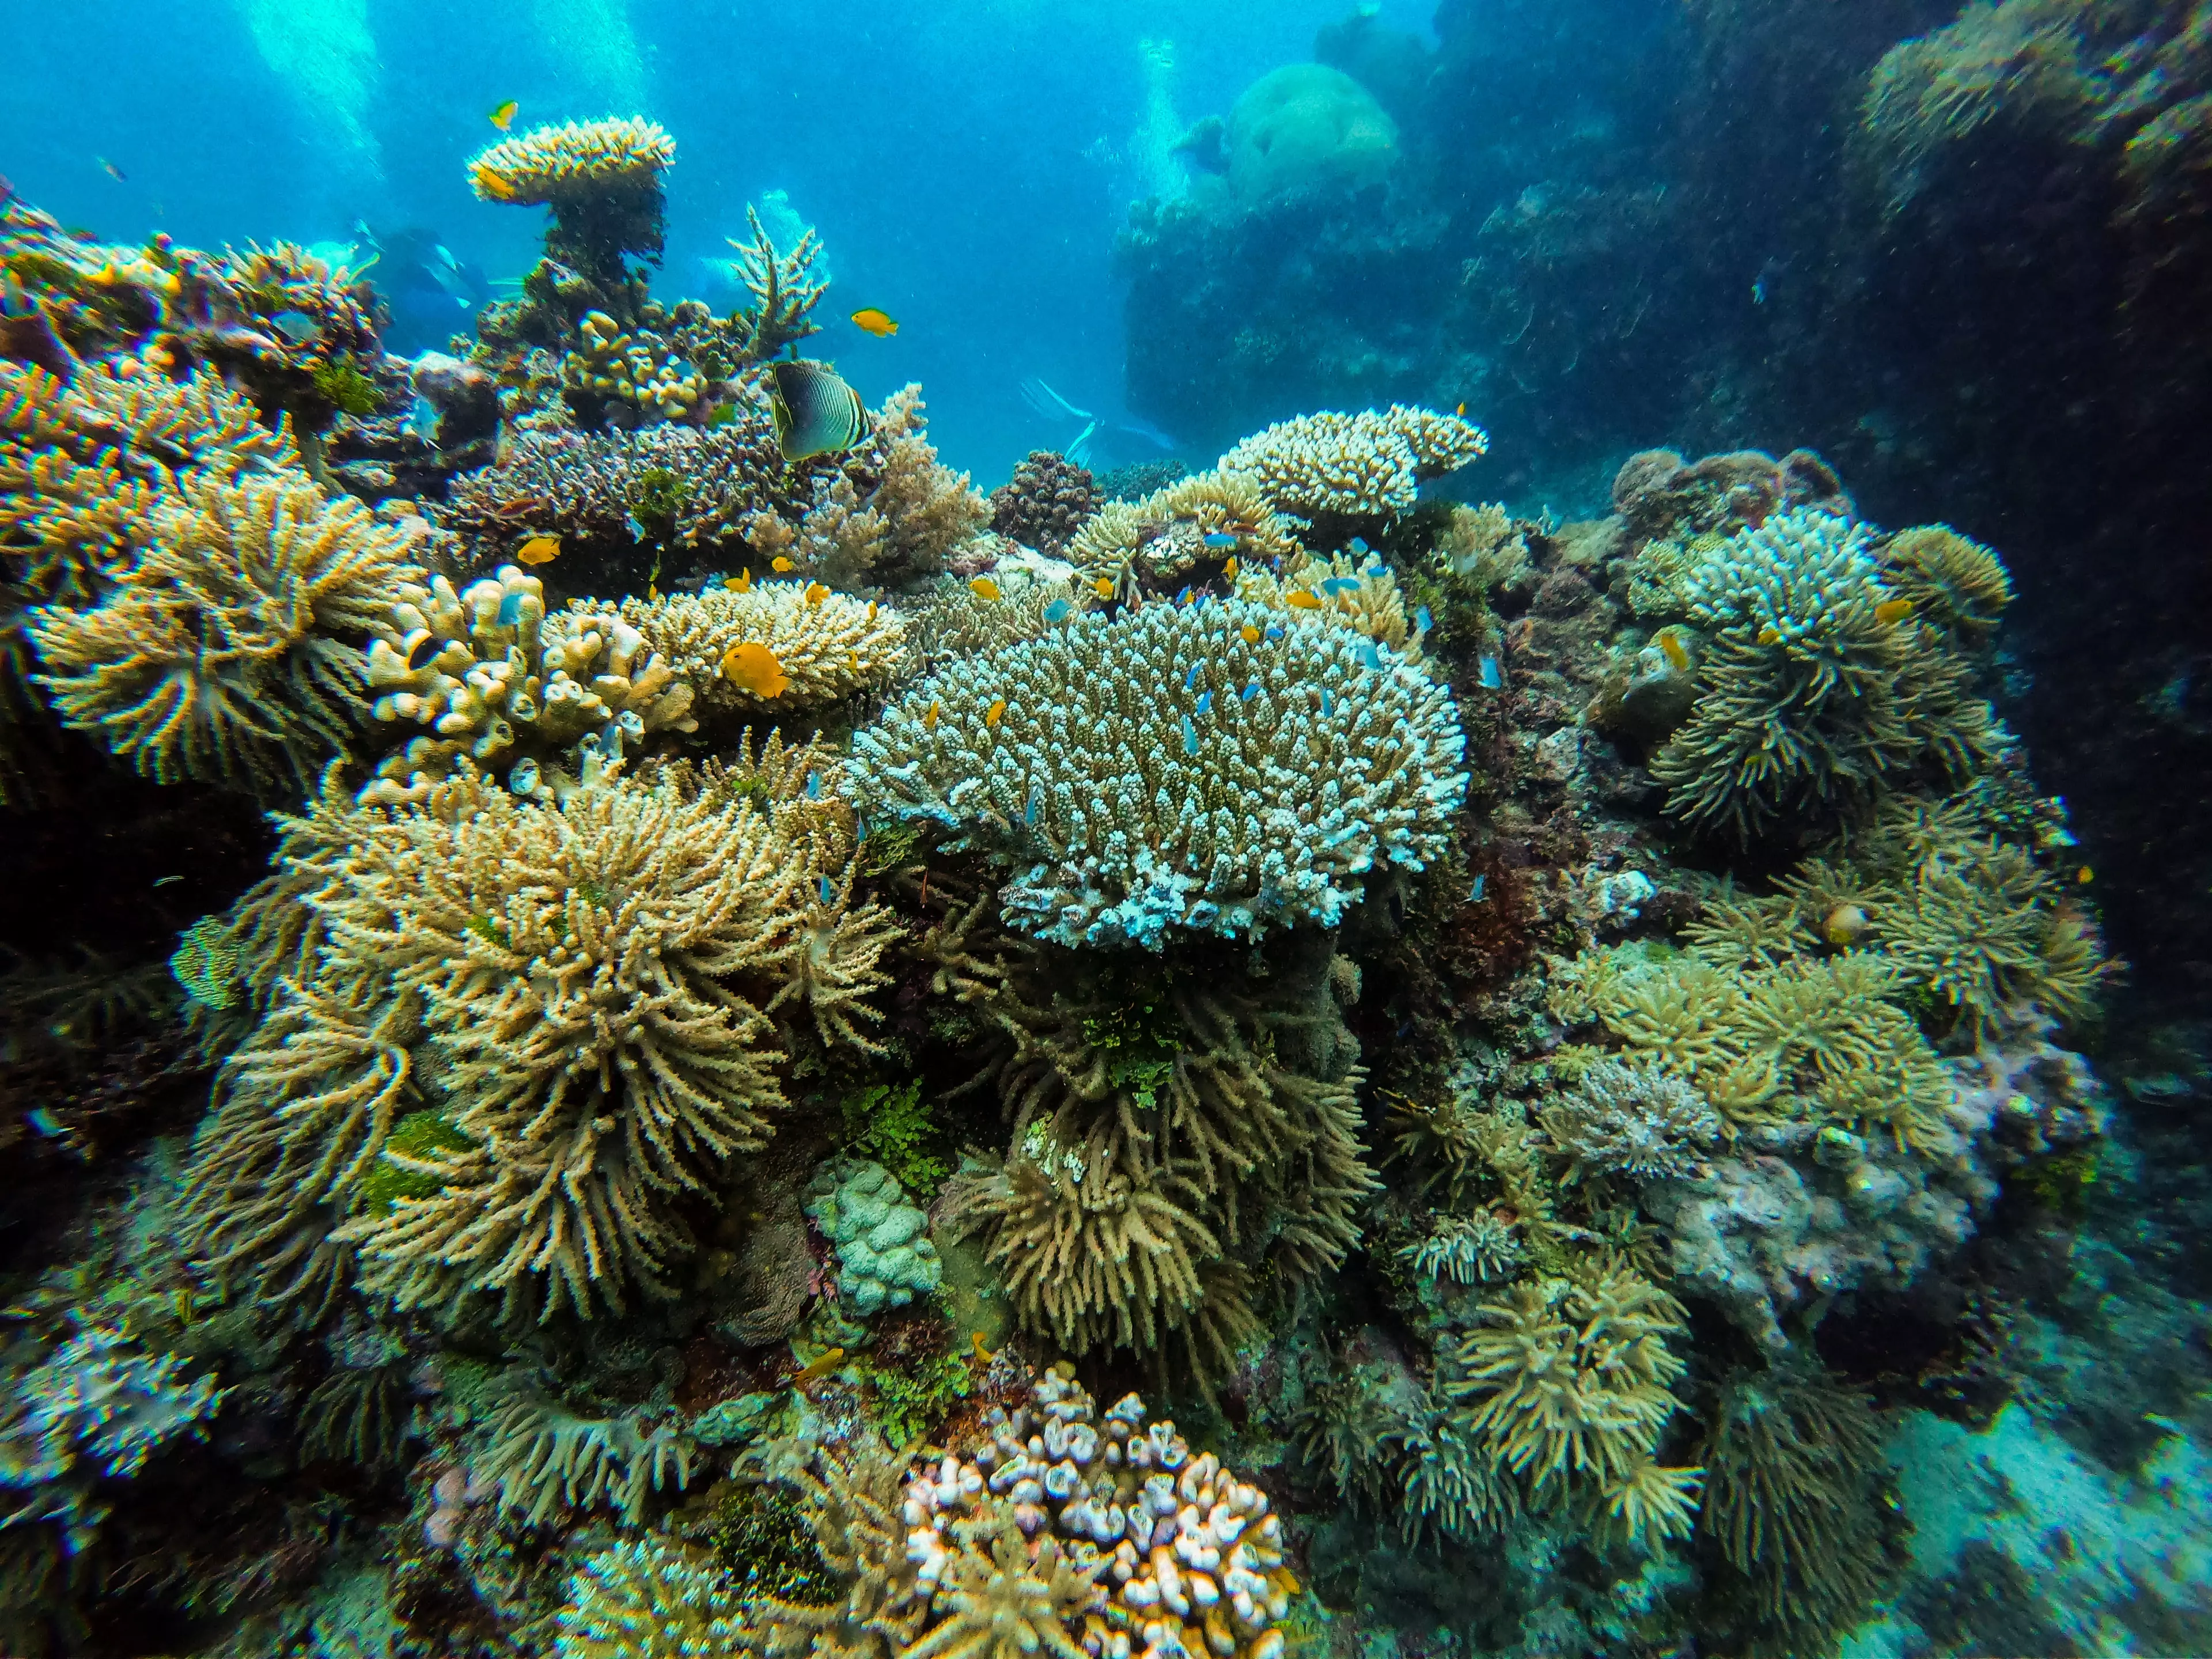 The Great Barrier Reef's status has been upgraded to 'critical' (